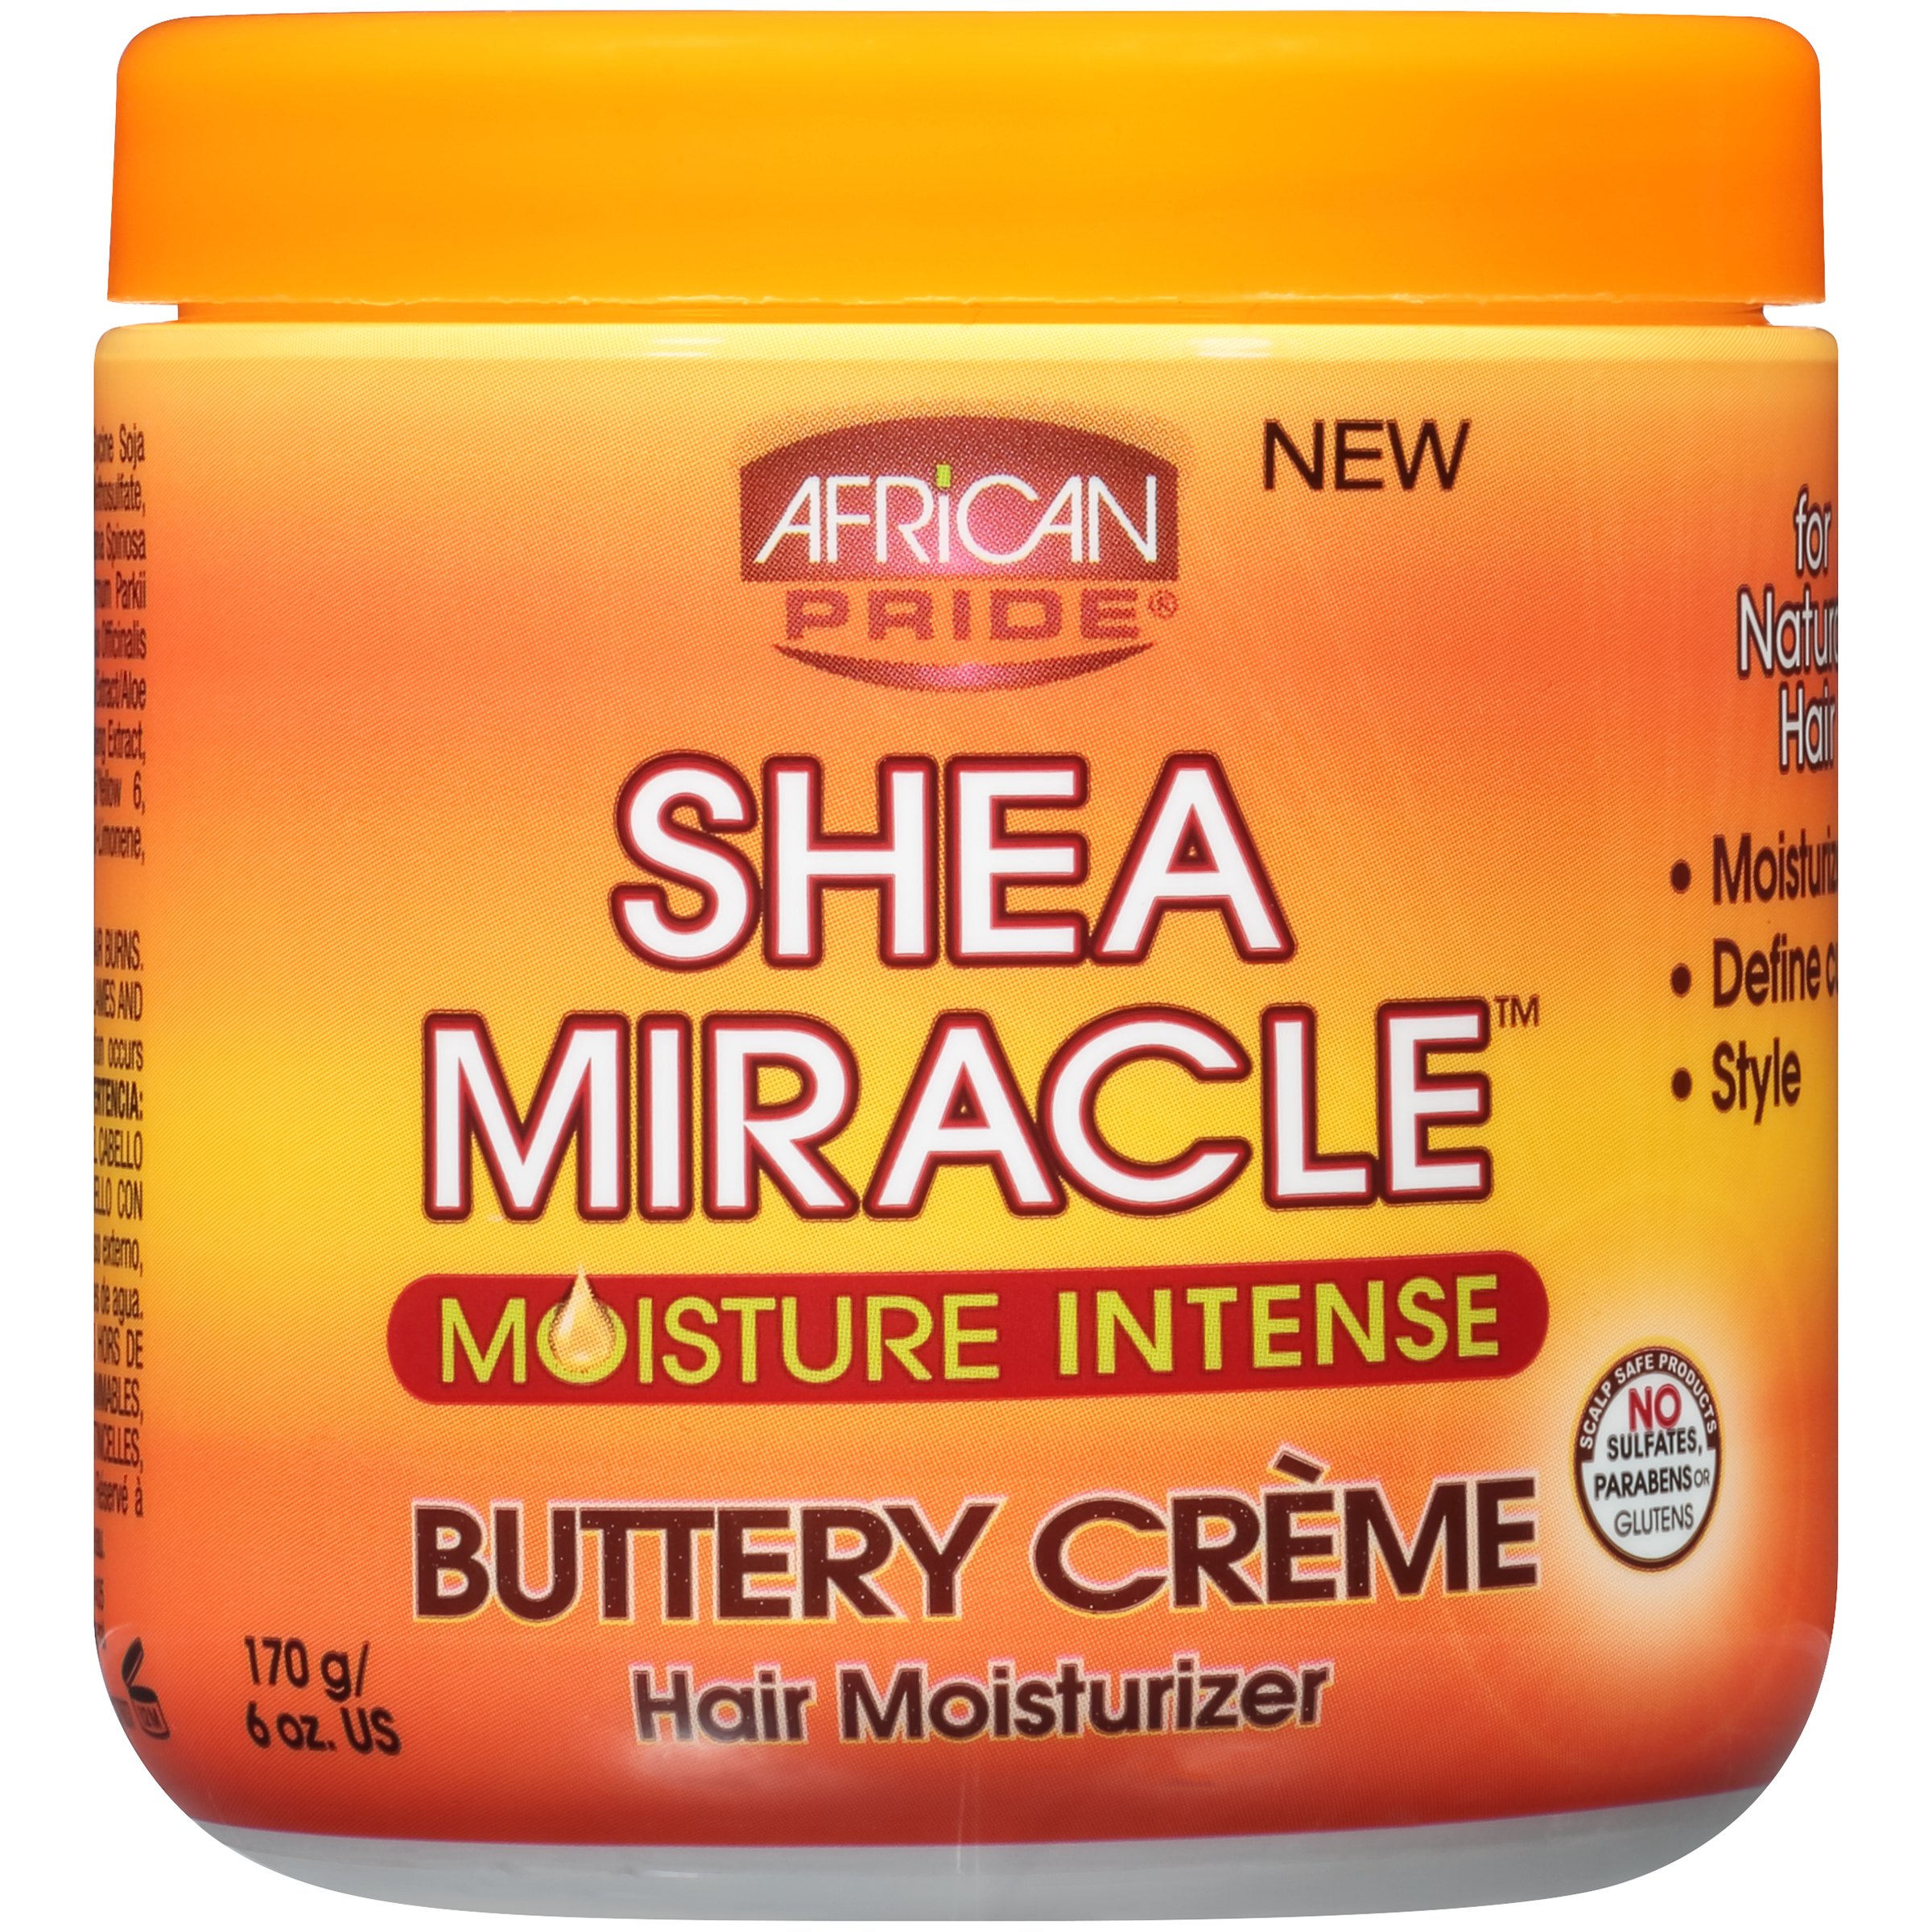 African Pride Shea Miracle Moisture Intense Buttery Leave In Cream Hair Moisturizer for Wavy, Curly, Coily Hair with Shea Butter, 6 oz. - image 1 of 6